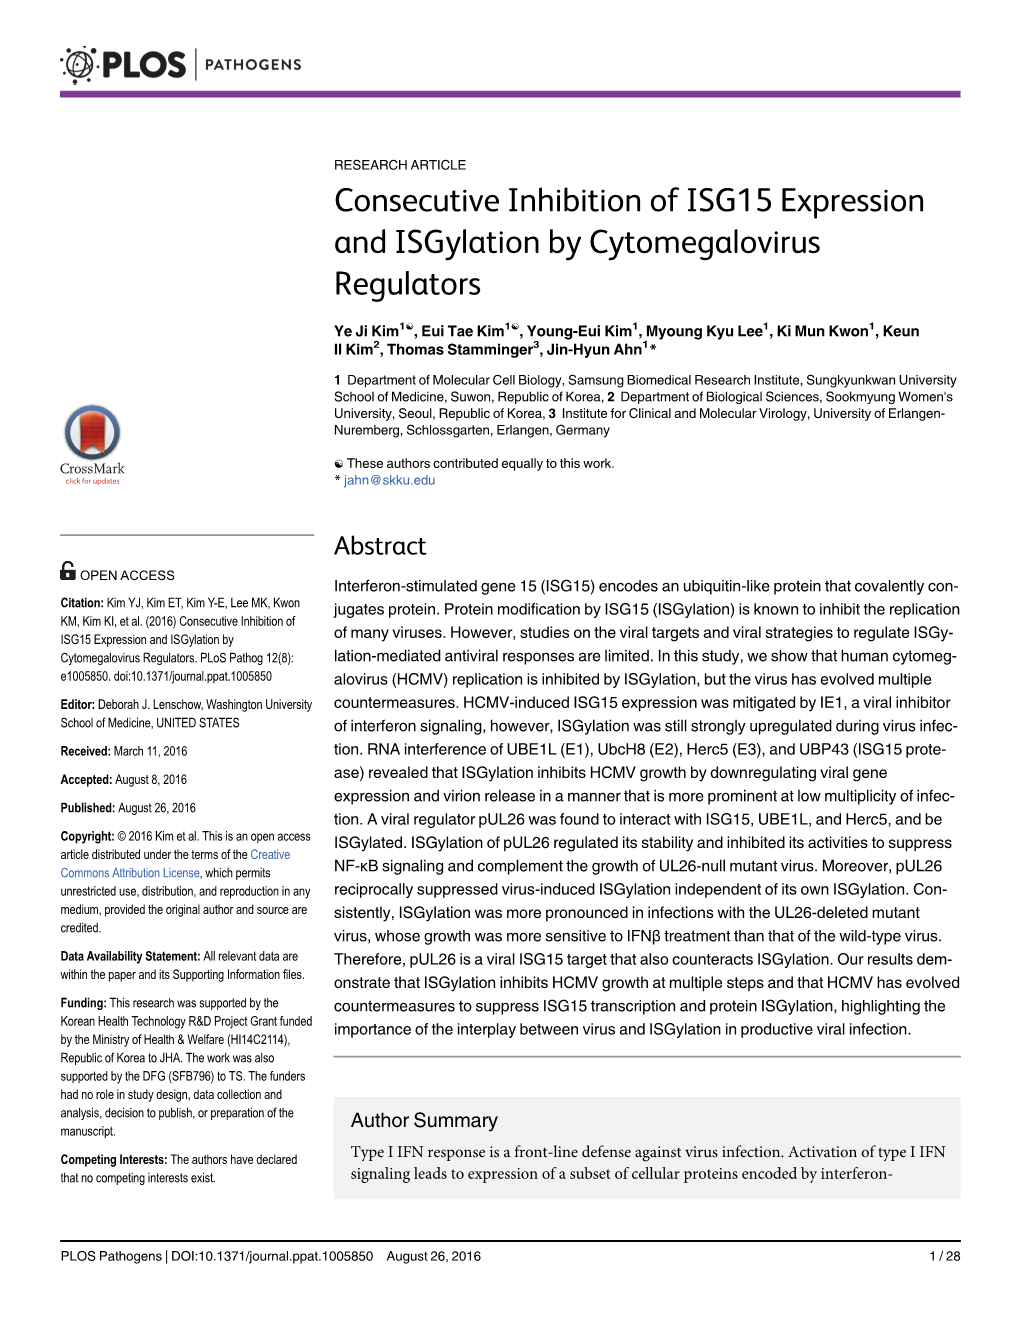 Consecutive Inhibition of ISG15 Expression and Isgylation by Cytomegalovirus Regulators